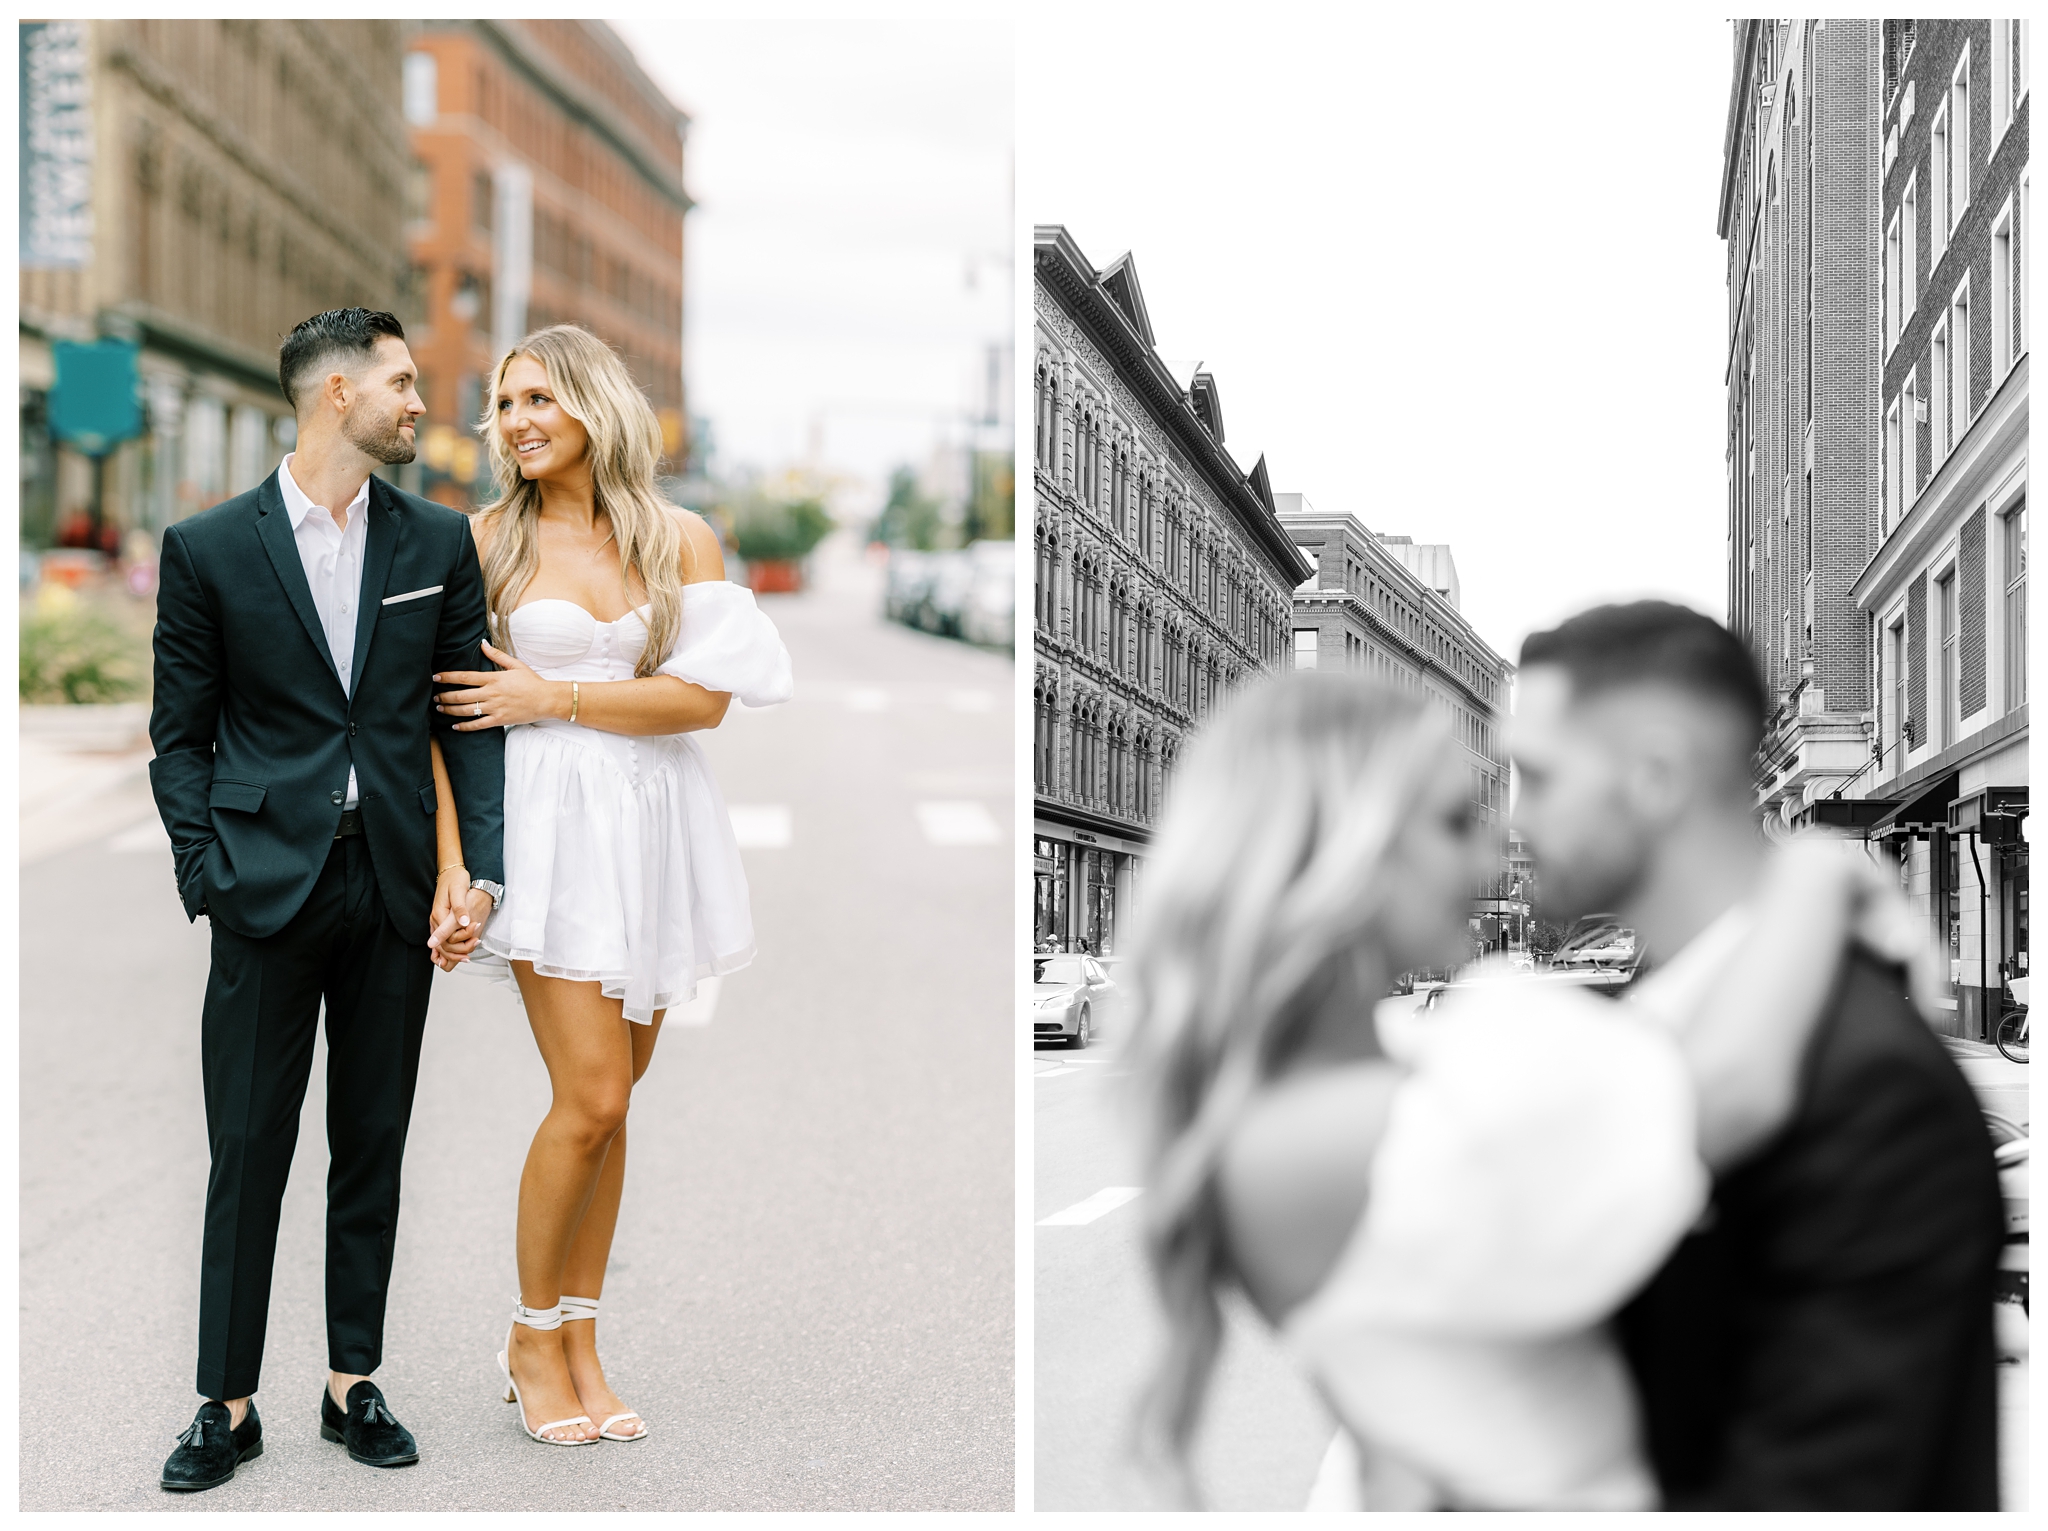 beautiful romantic downtown and bar engagement shoot in grand rapids by josh and andrea photography with a champagne pop